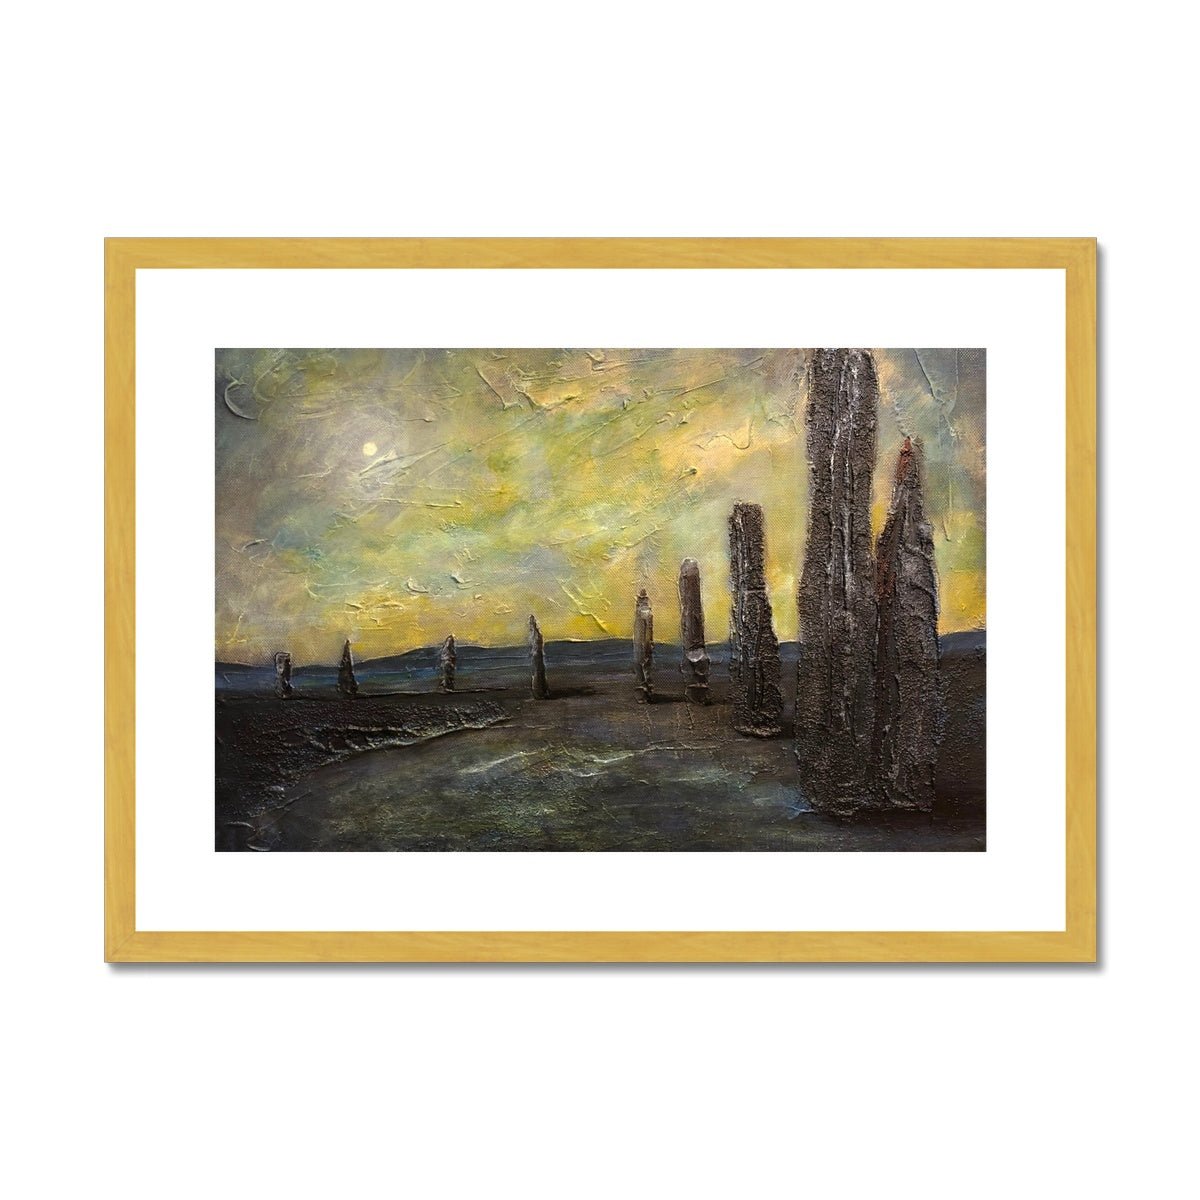 An Ethereal Ring Of Brodgar Orkney Painting | Antique Framed & Mounted Prints From Scotland-Antique Framed & Mounted Prints-Orkney Art Gallery-A2 Landscape-Gold Frame-Paintings, Prints, Homeware, Art Gifts From Scotland By Scottish Artist Kevin Hunter